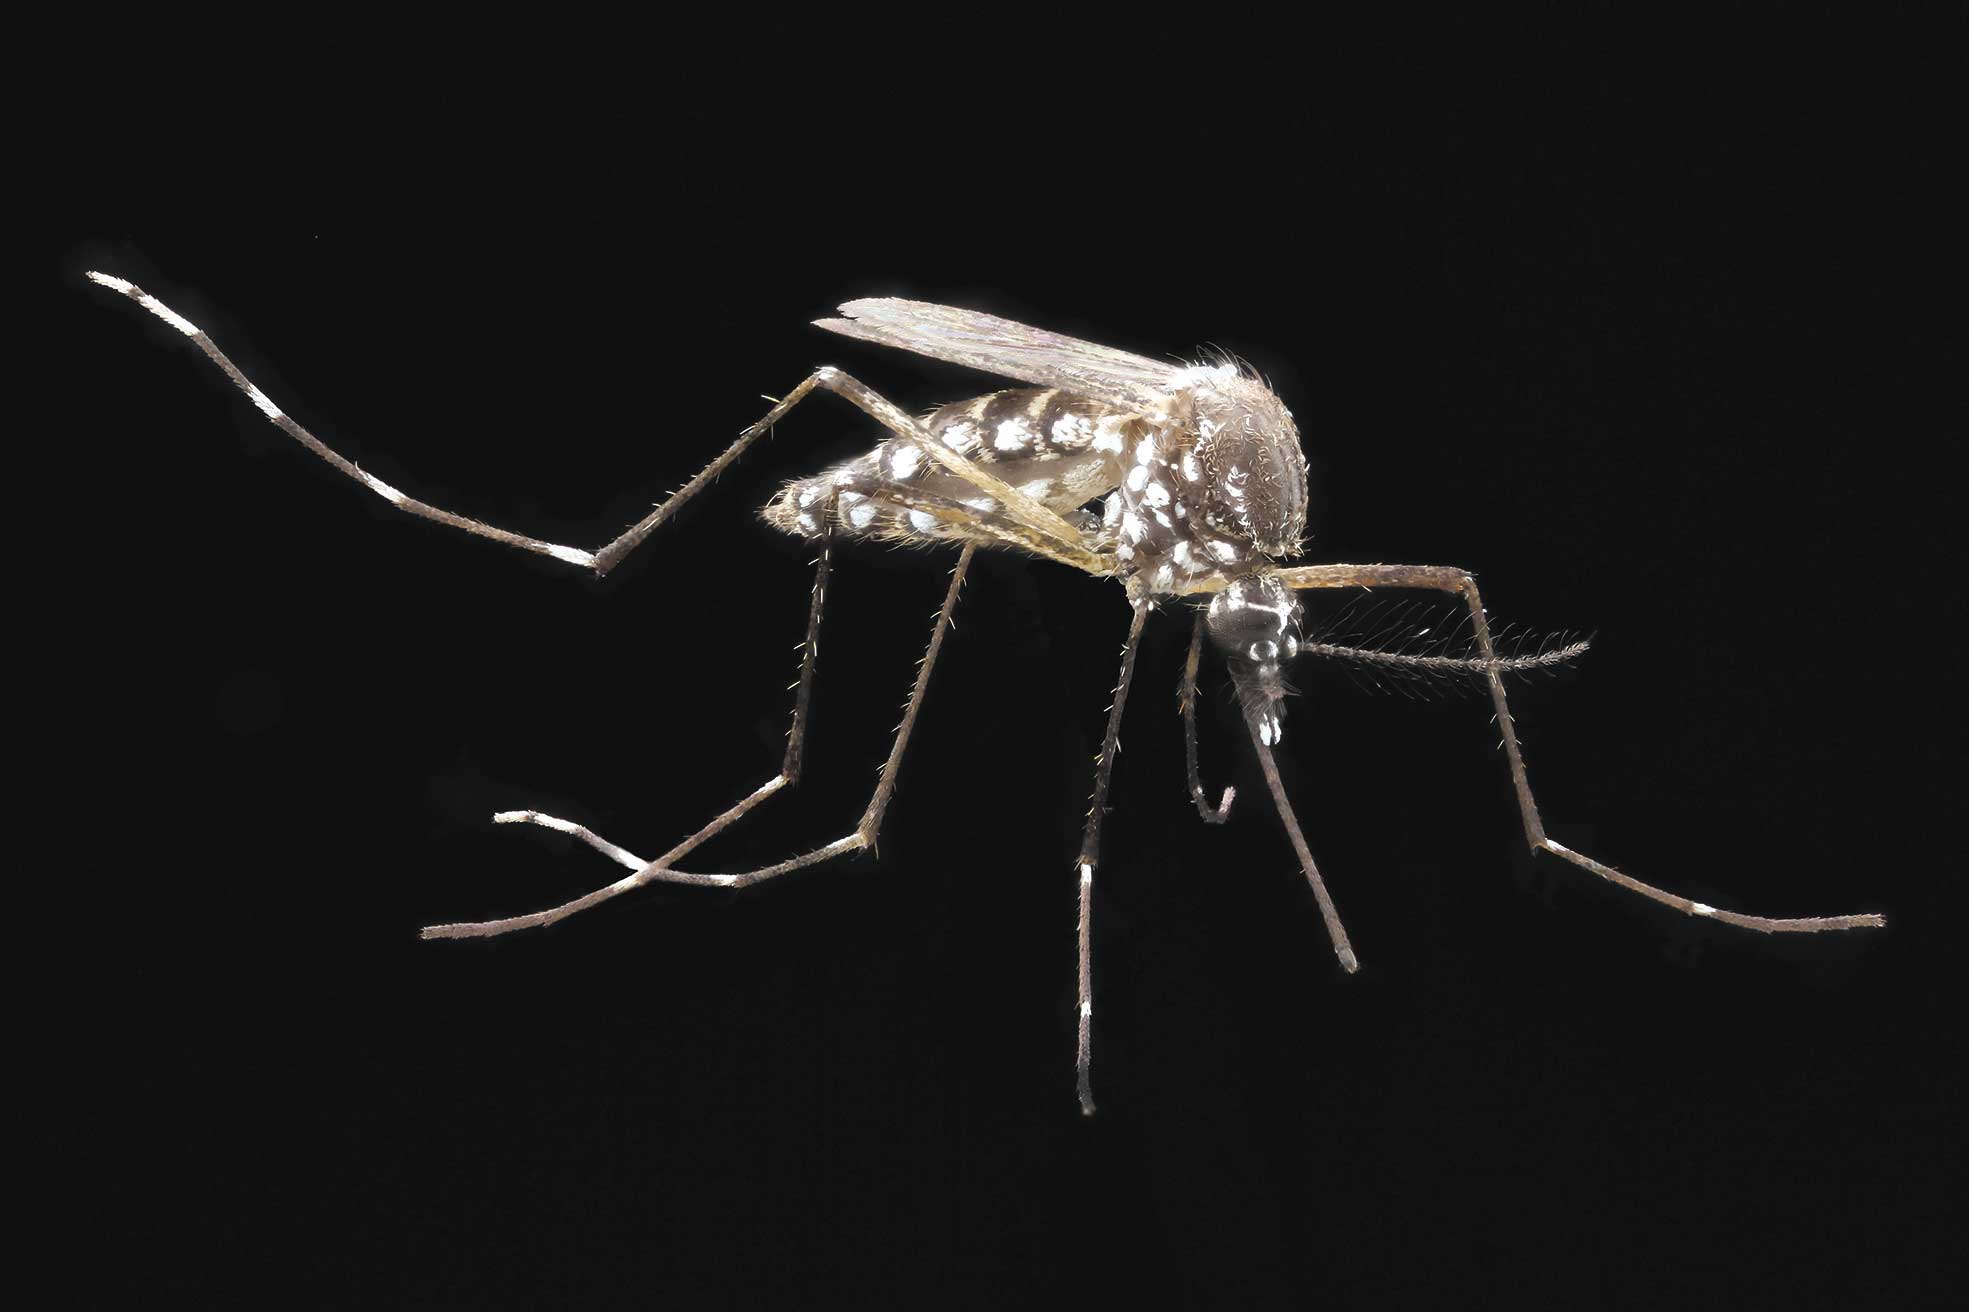 The country has seen a dramatic increase in the mosquito-borne Chikungunya regions of northeast Colombia most severely affected.